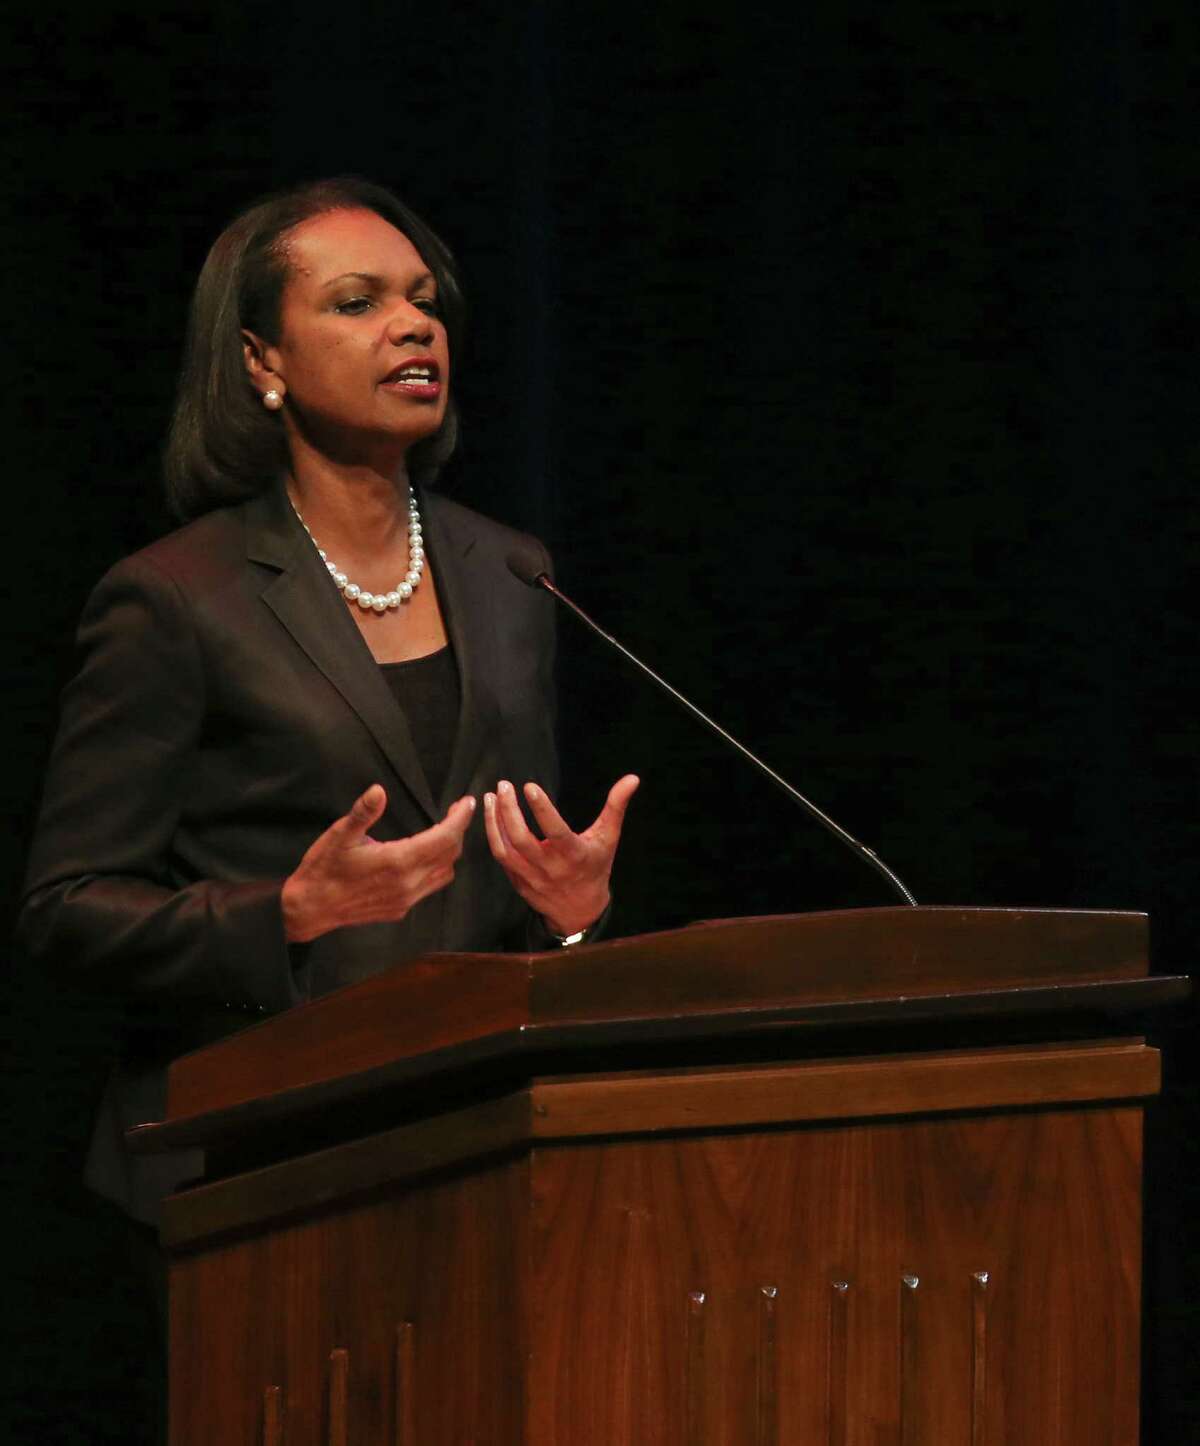 Former Secretary of State Condoleezza Rice canceled a speech at Rutgers University after student protests.